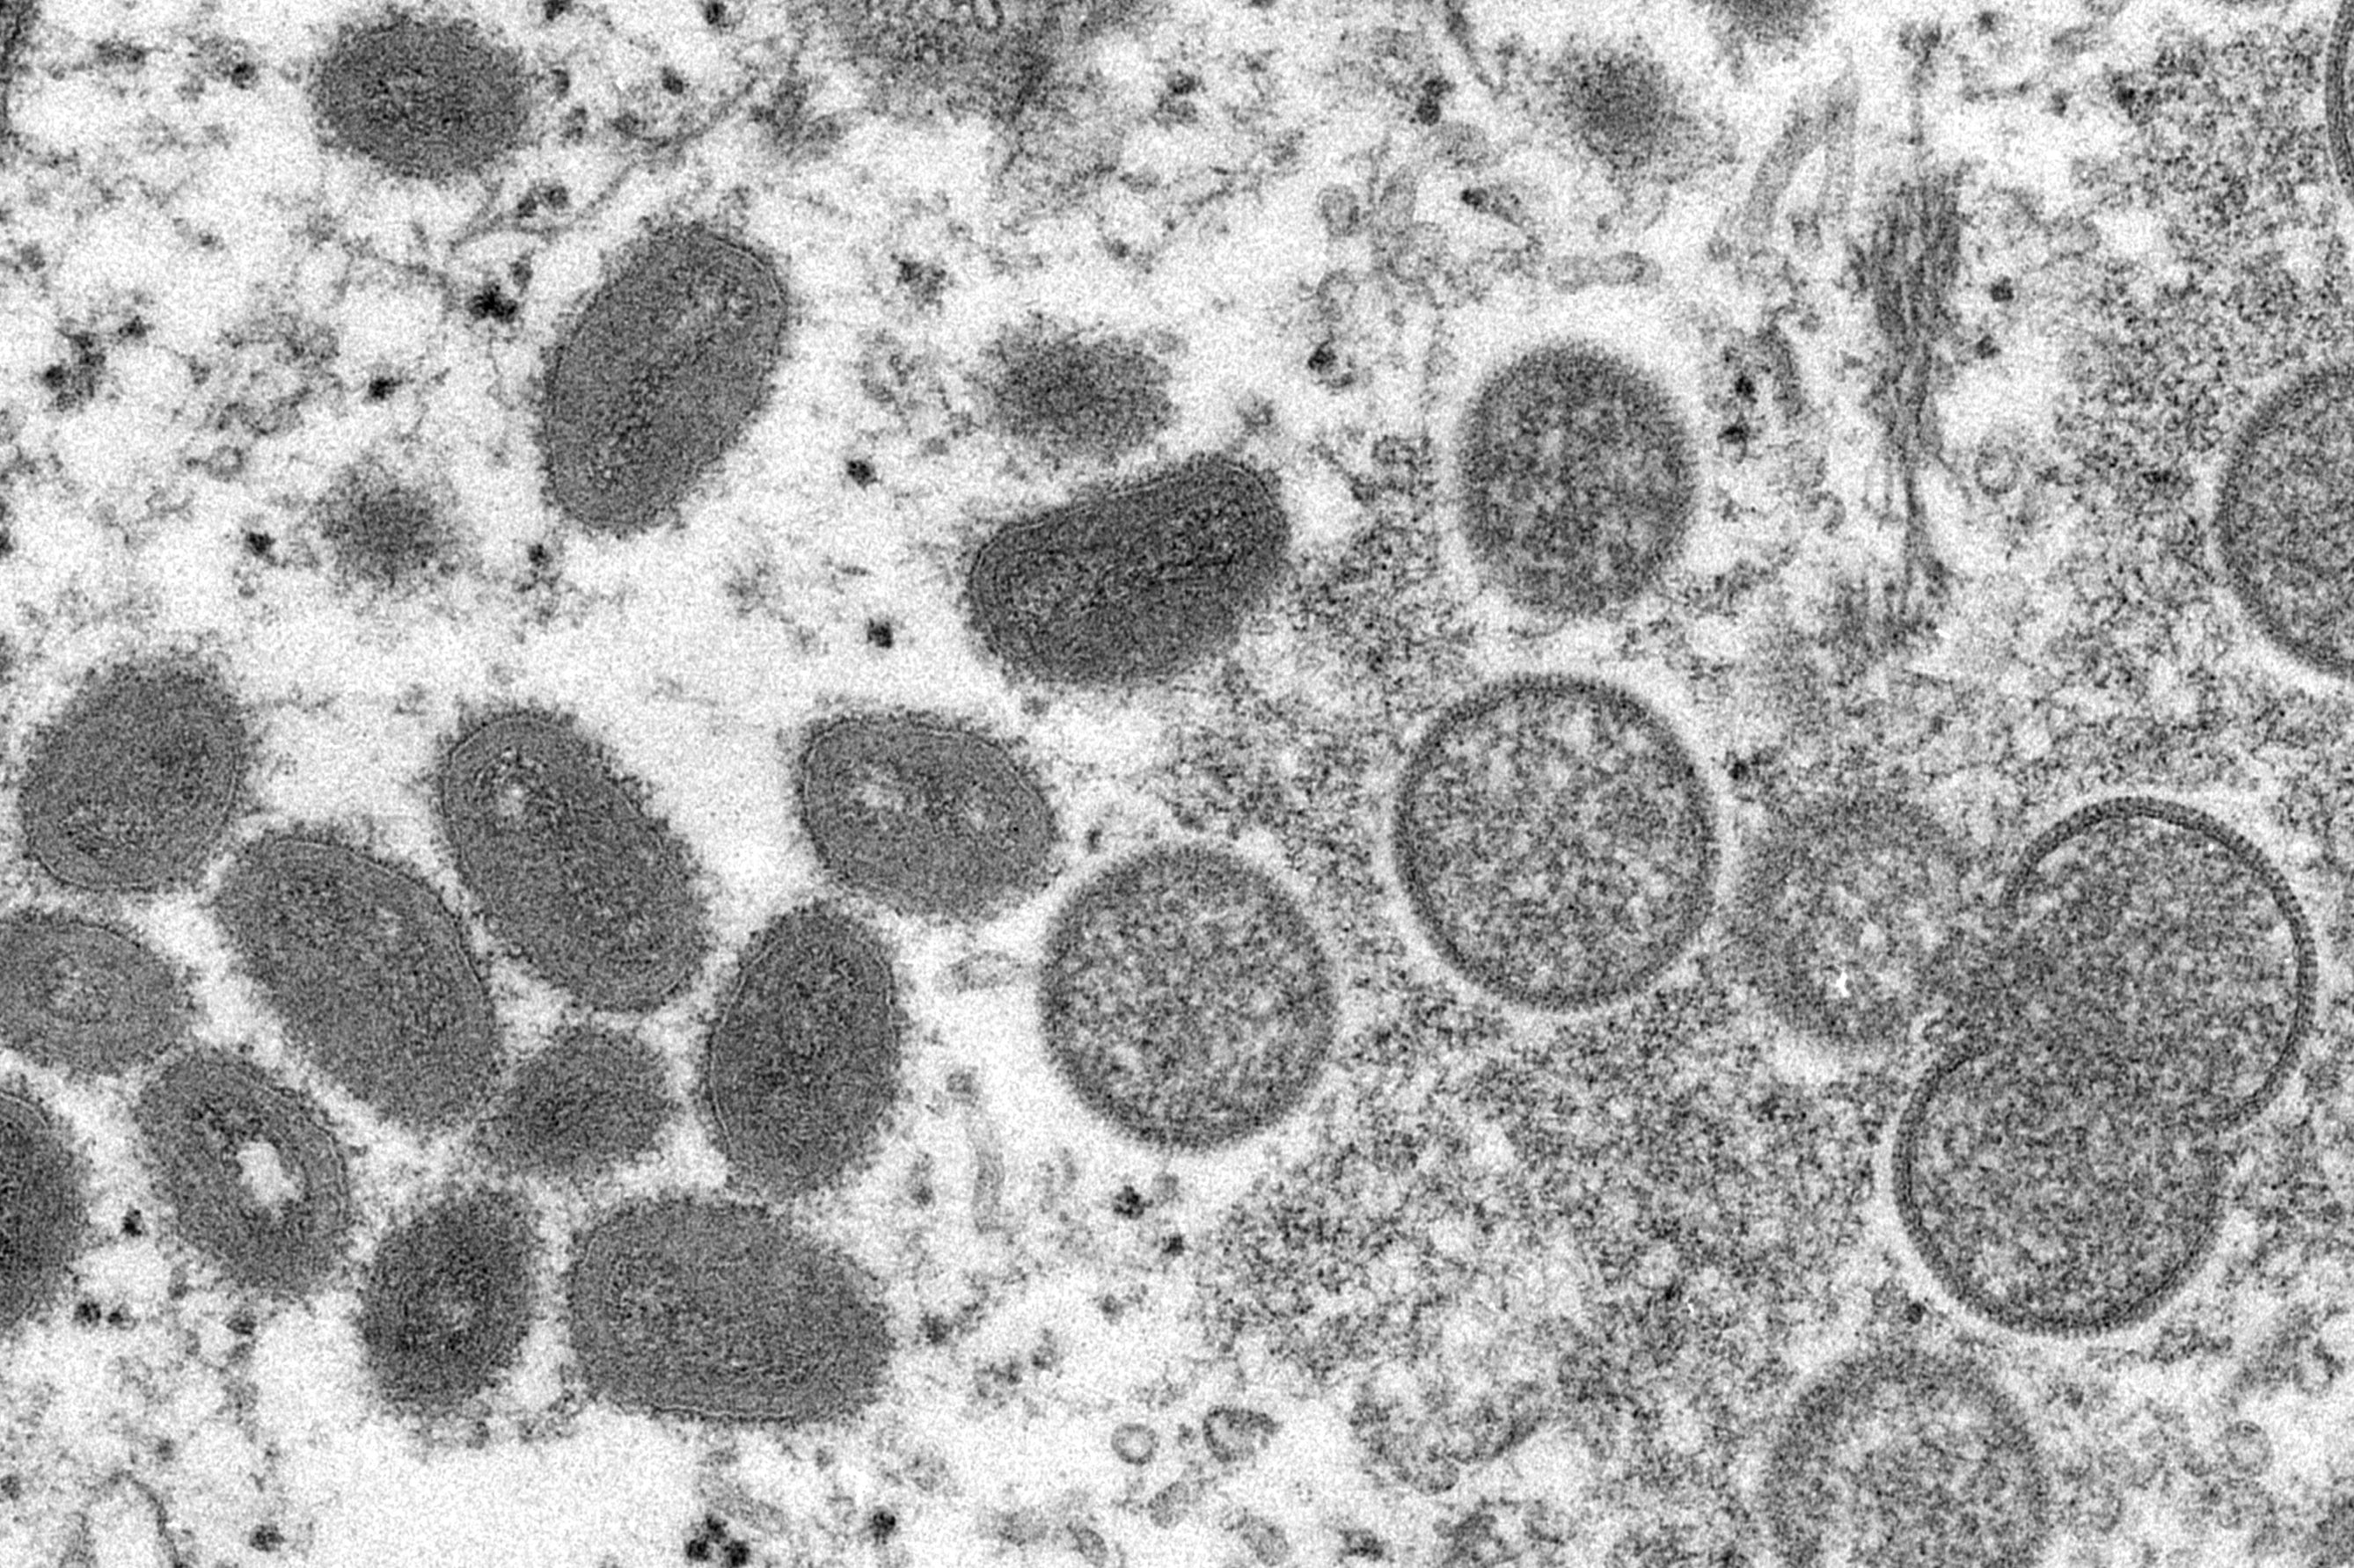 Electron microscope image from 200 showing mature, oval-shaped monkeypox virions